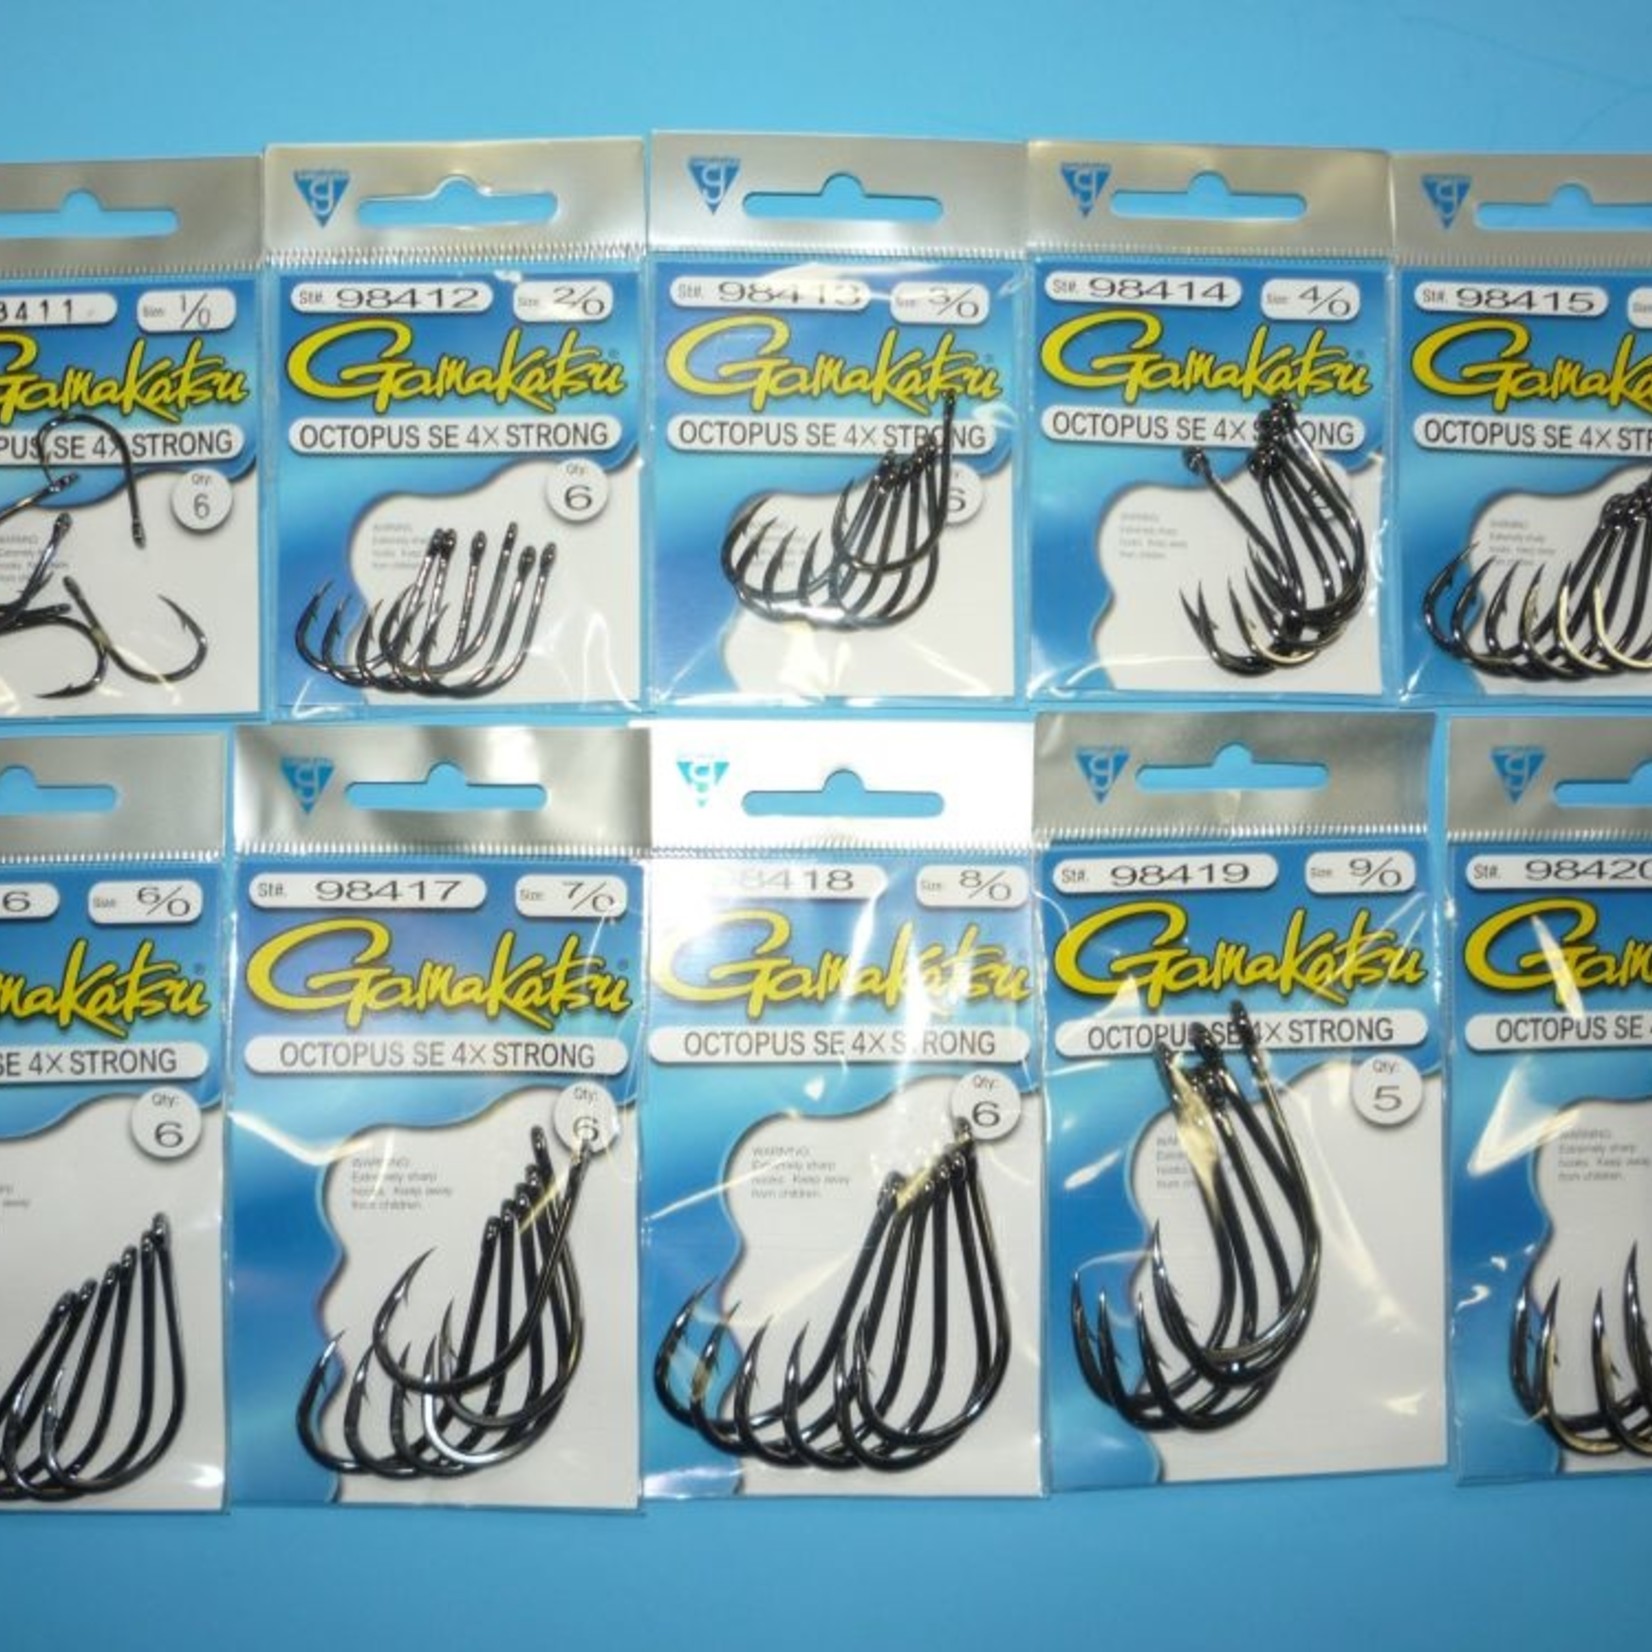 Gamakatsu 4X Octopus Hook Black – Spider Rigs/Rigged&Ready Offshore Lures